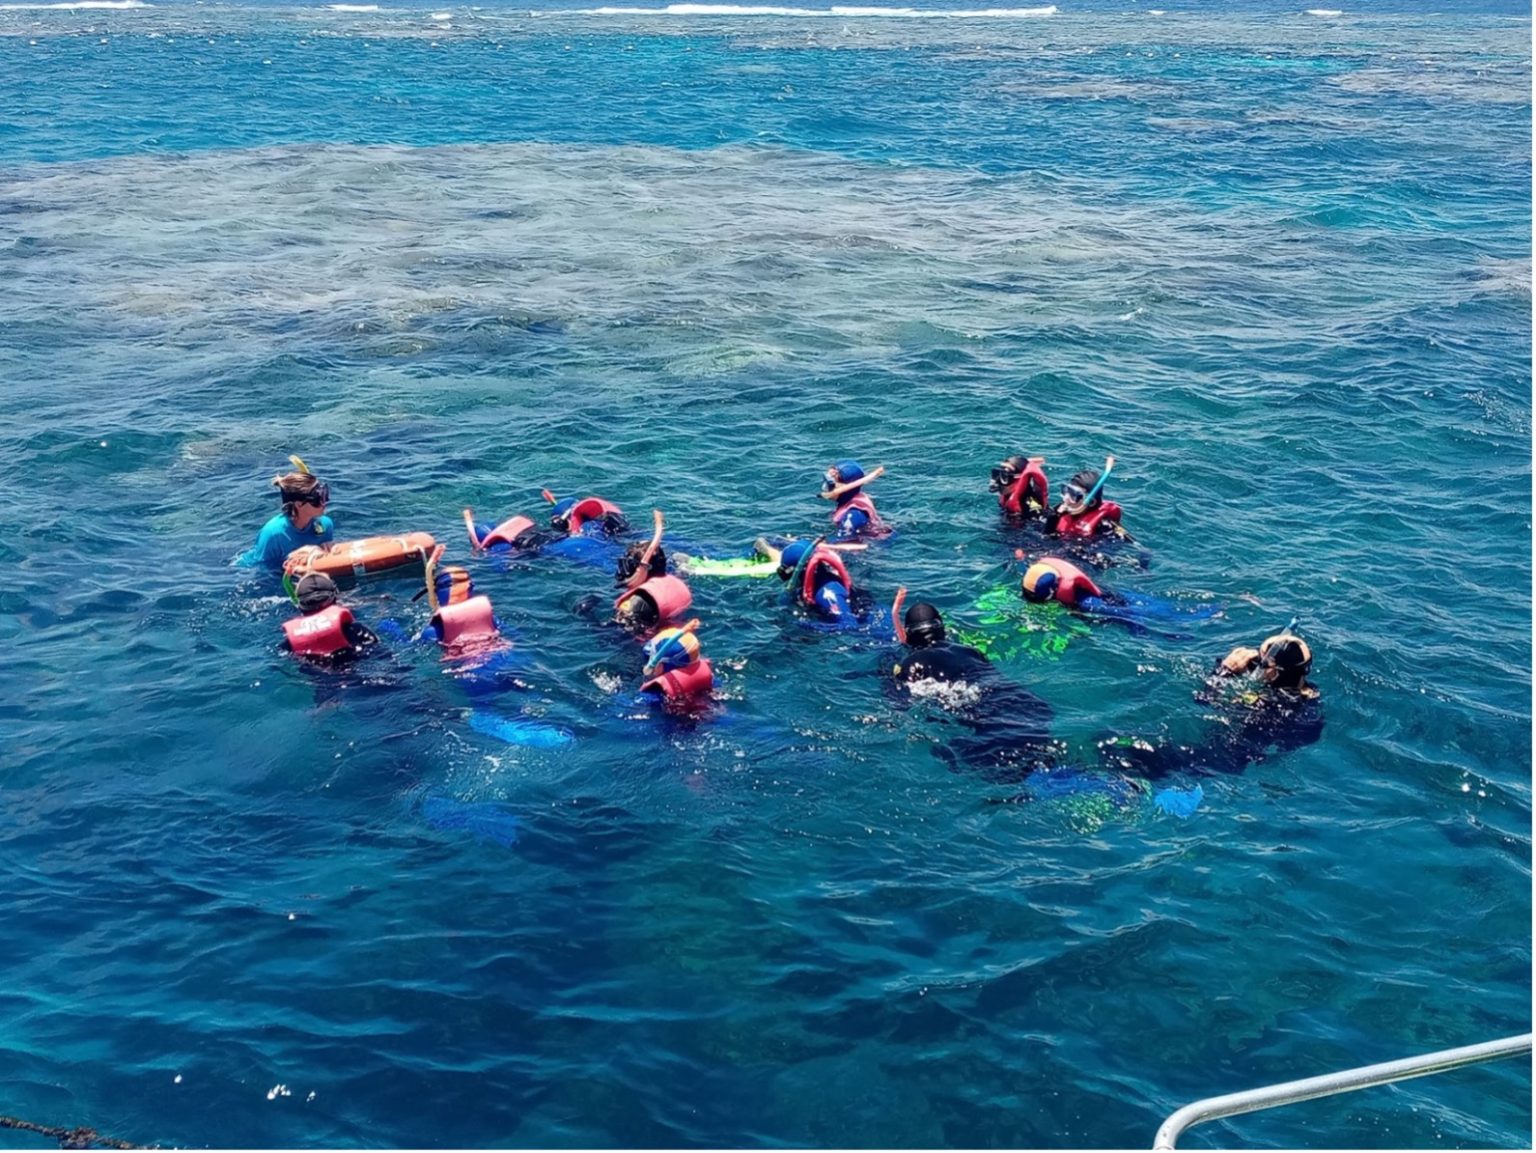 The Reef This Week – With St John’s Lutheran School